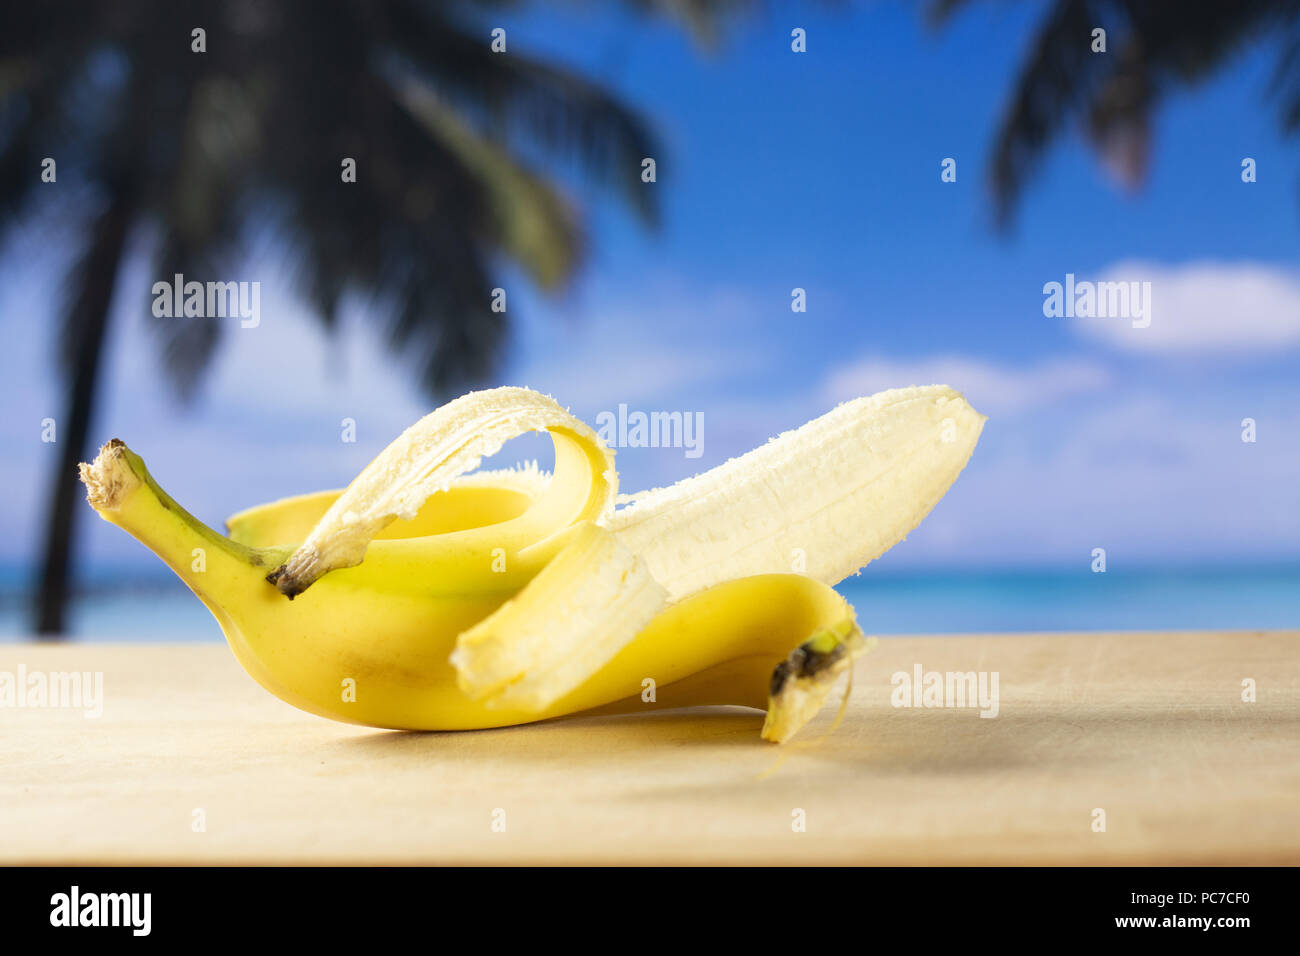 One whole open fresh yellow banana with palm trees on the beach in background Stock Photo